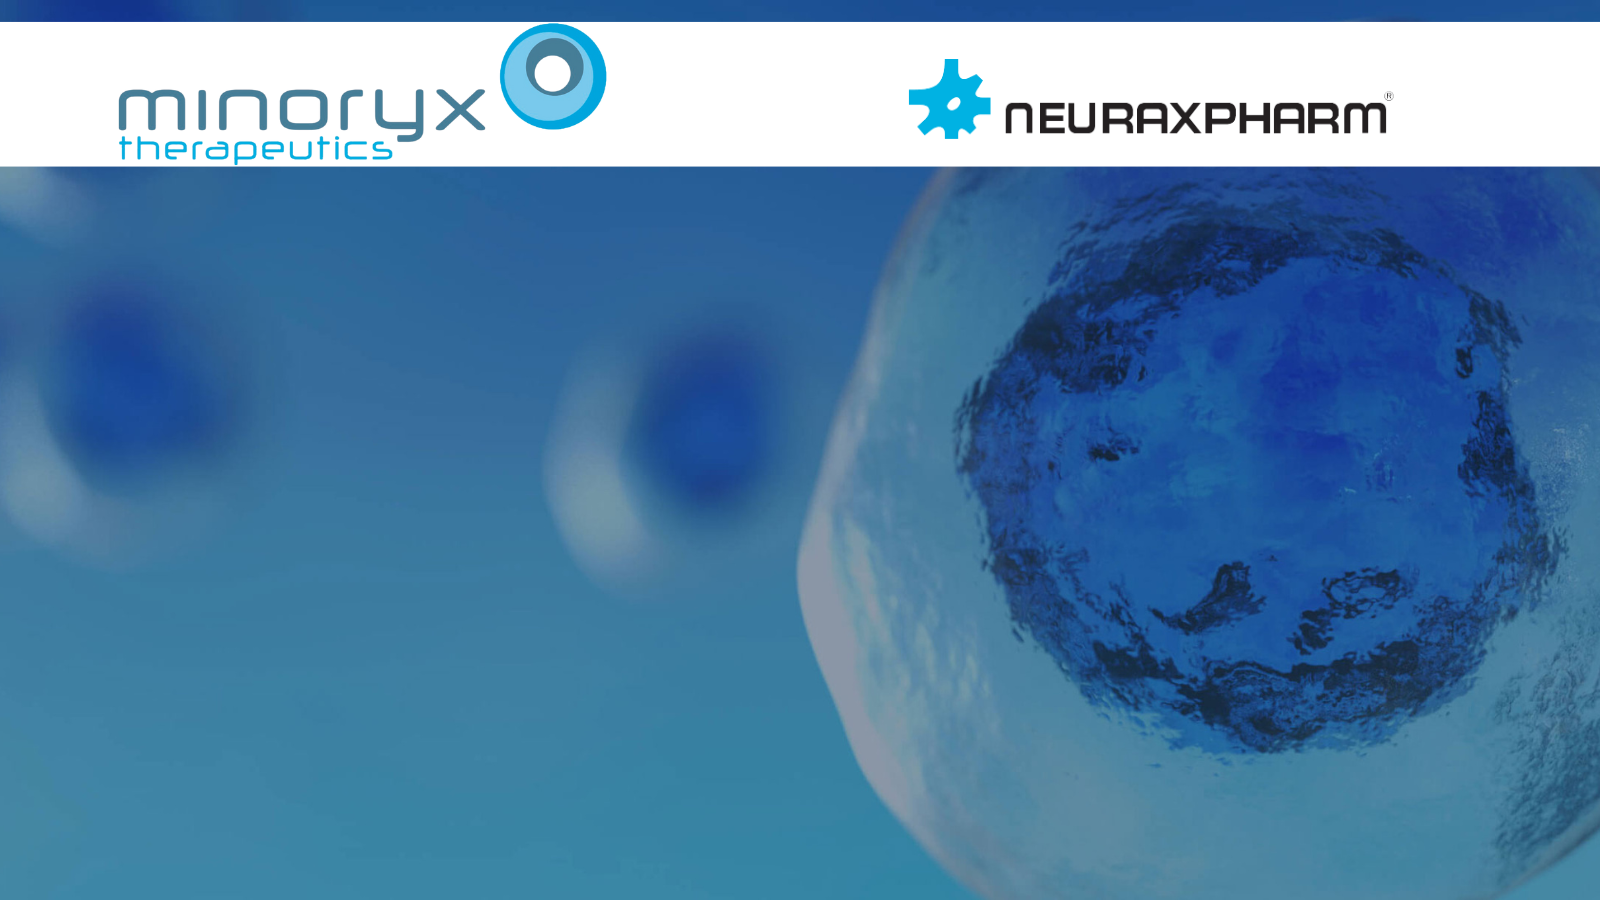 Minoryx and Neuraxpharm announce a strategic alliance to provide a new therapy for rare CNS disease patients in Europe<